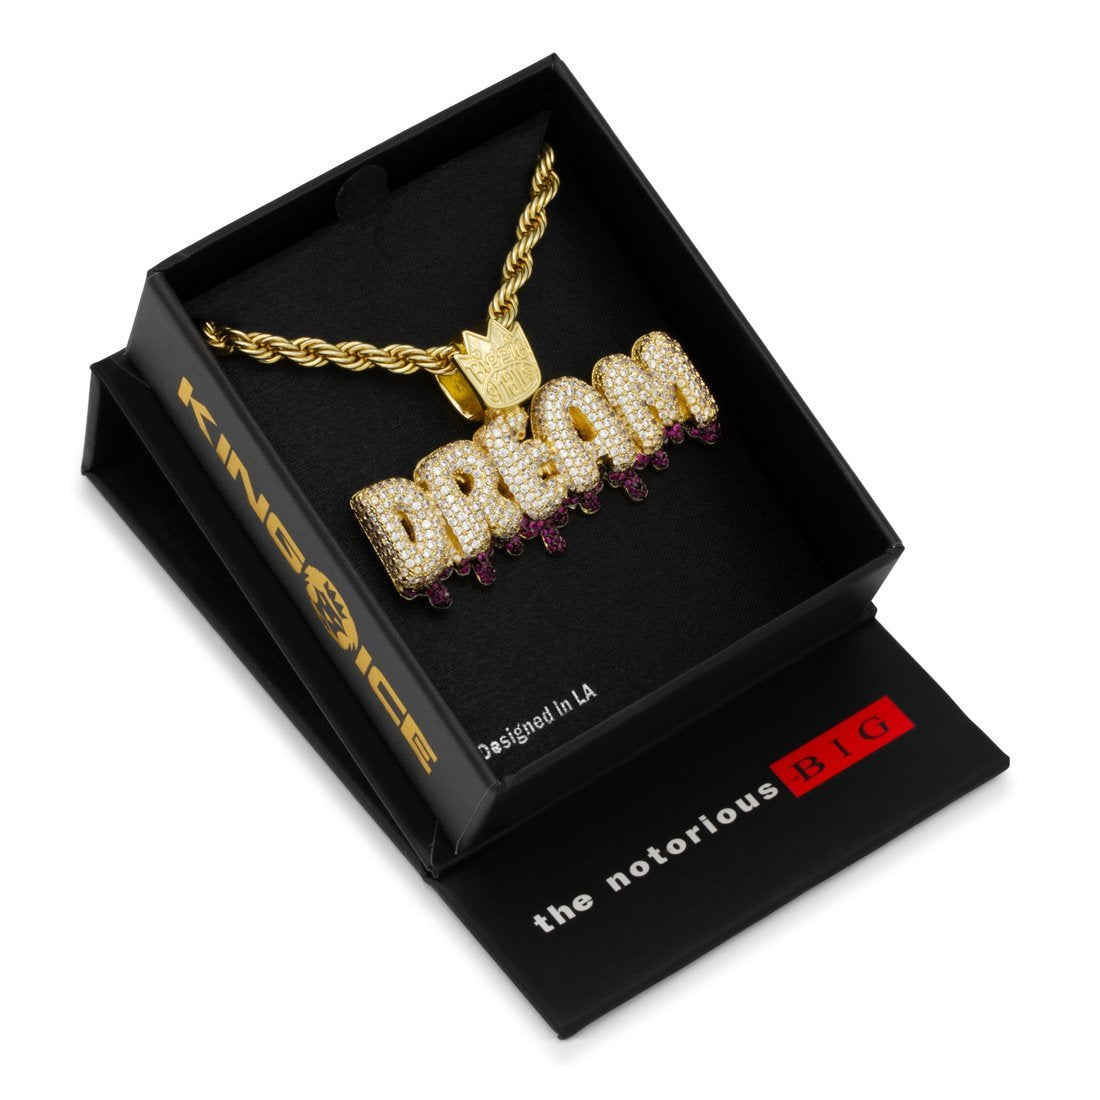 Notorious B.I.G. x King Ice - Dream Necklace